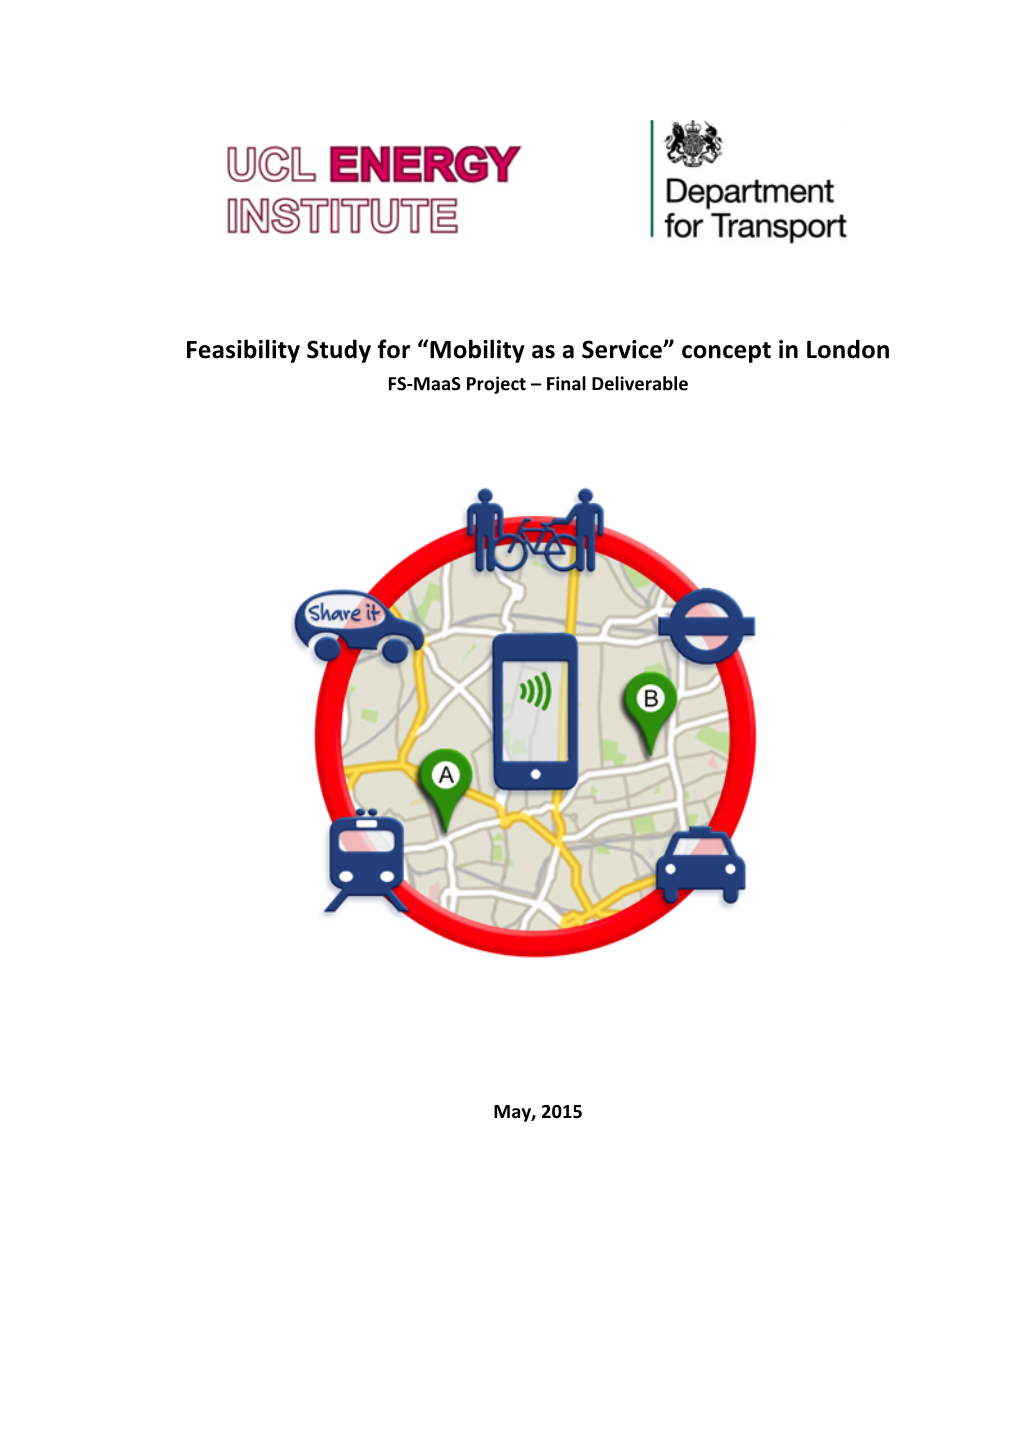 Feasibility Study for “Mobility As a Service” Concept in London FSMaas